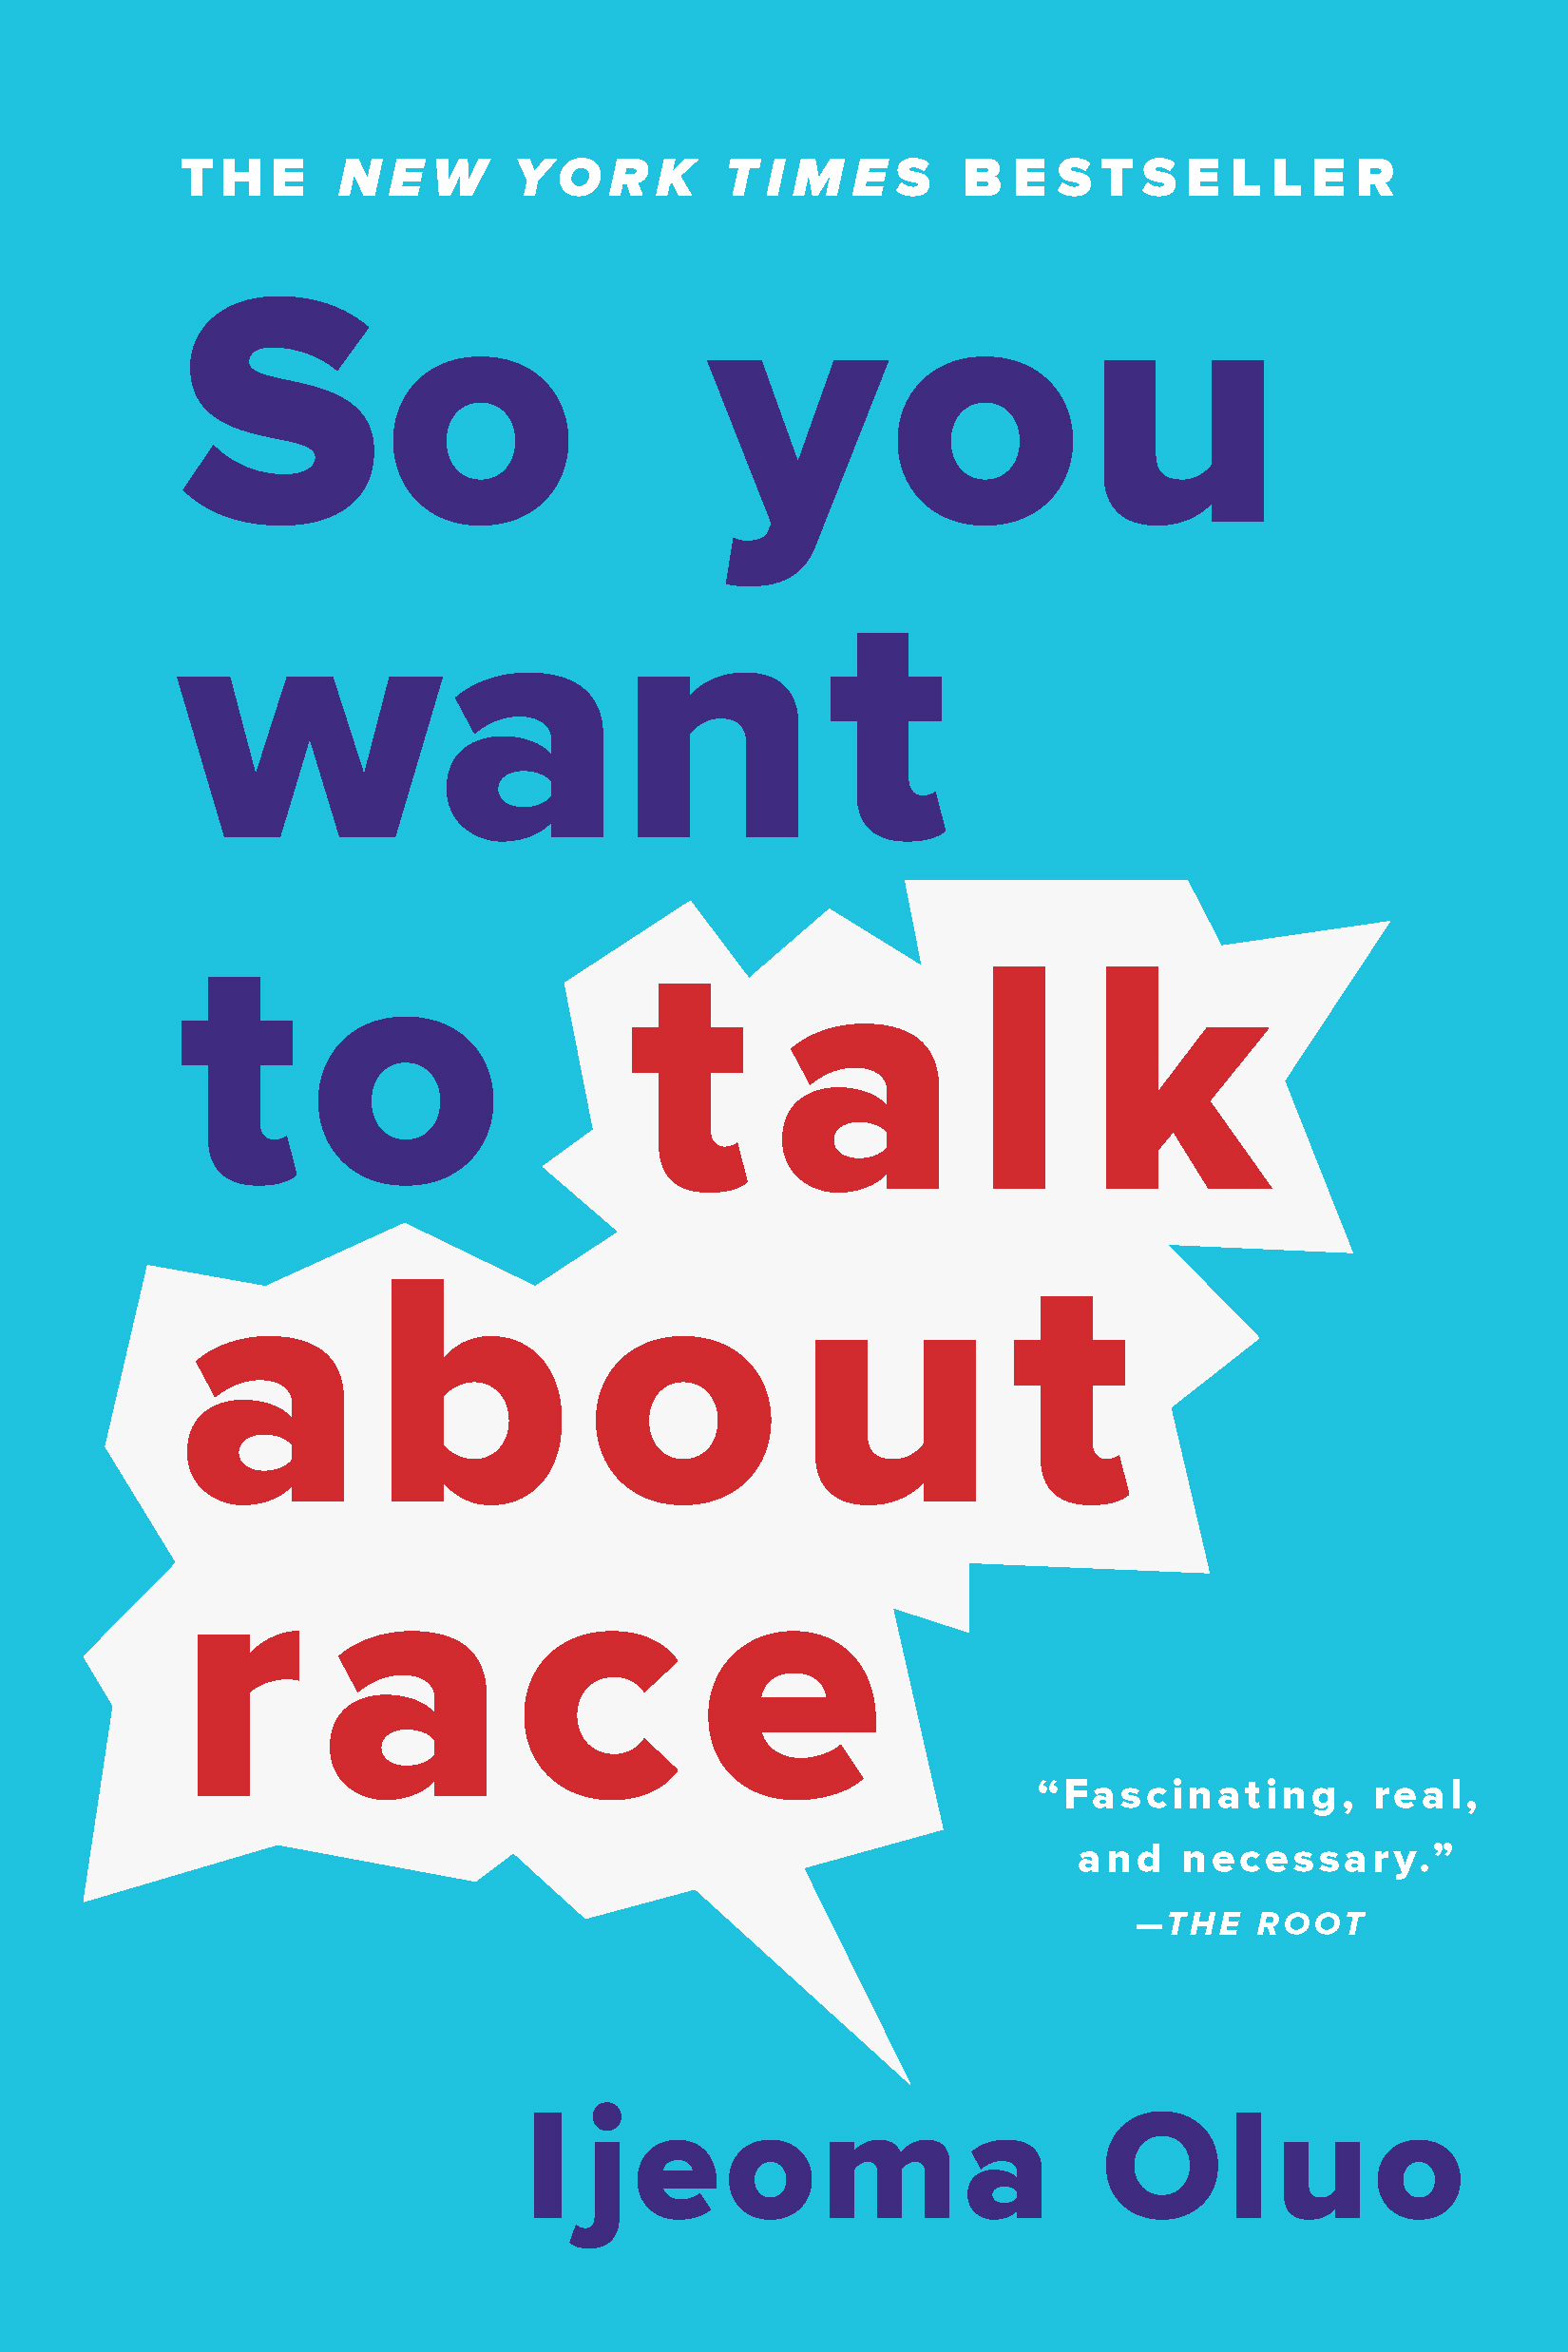 Schoolgirl Fucks Black Teacher - So You Want to Talk About Race by Ijeoma Oluo | Hachette Book Group